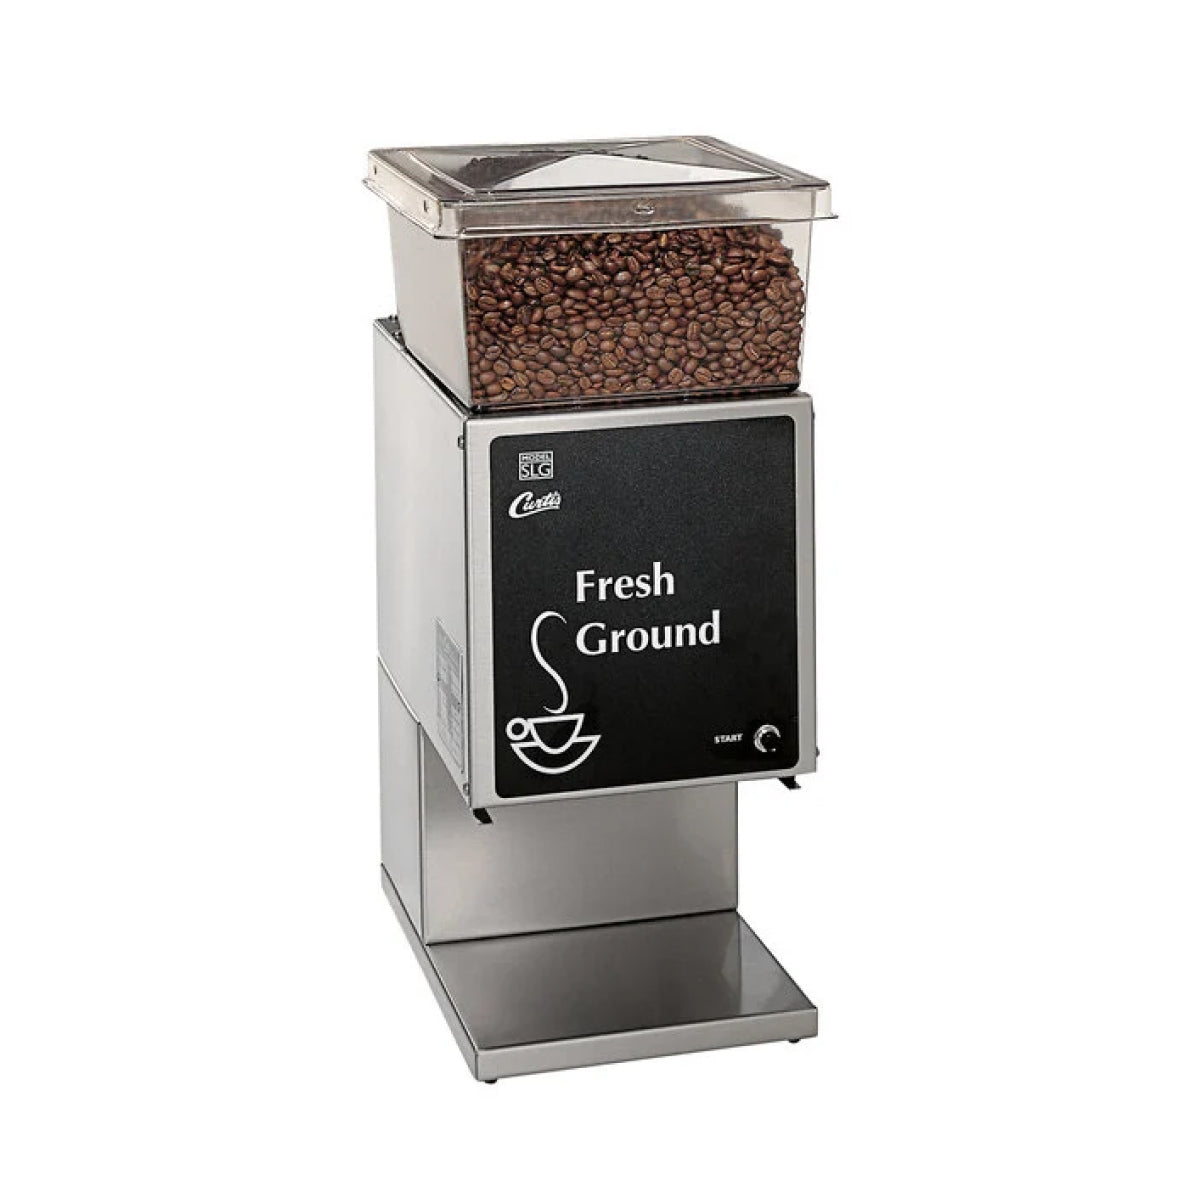 Curtis SLG Commercial Coffee Grinder